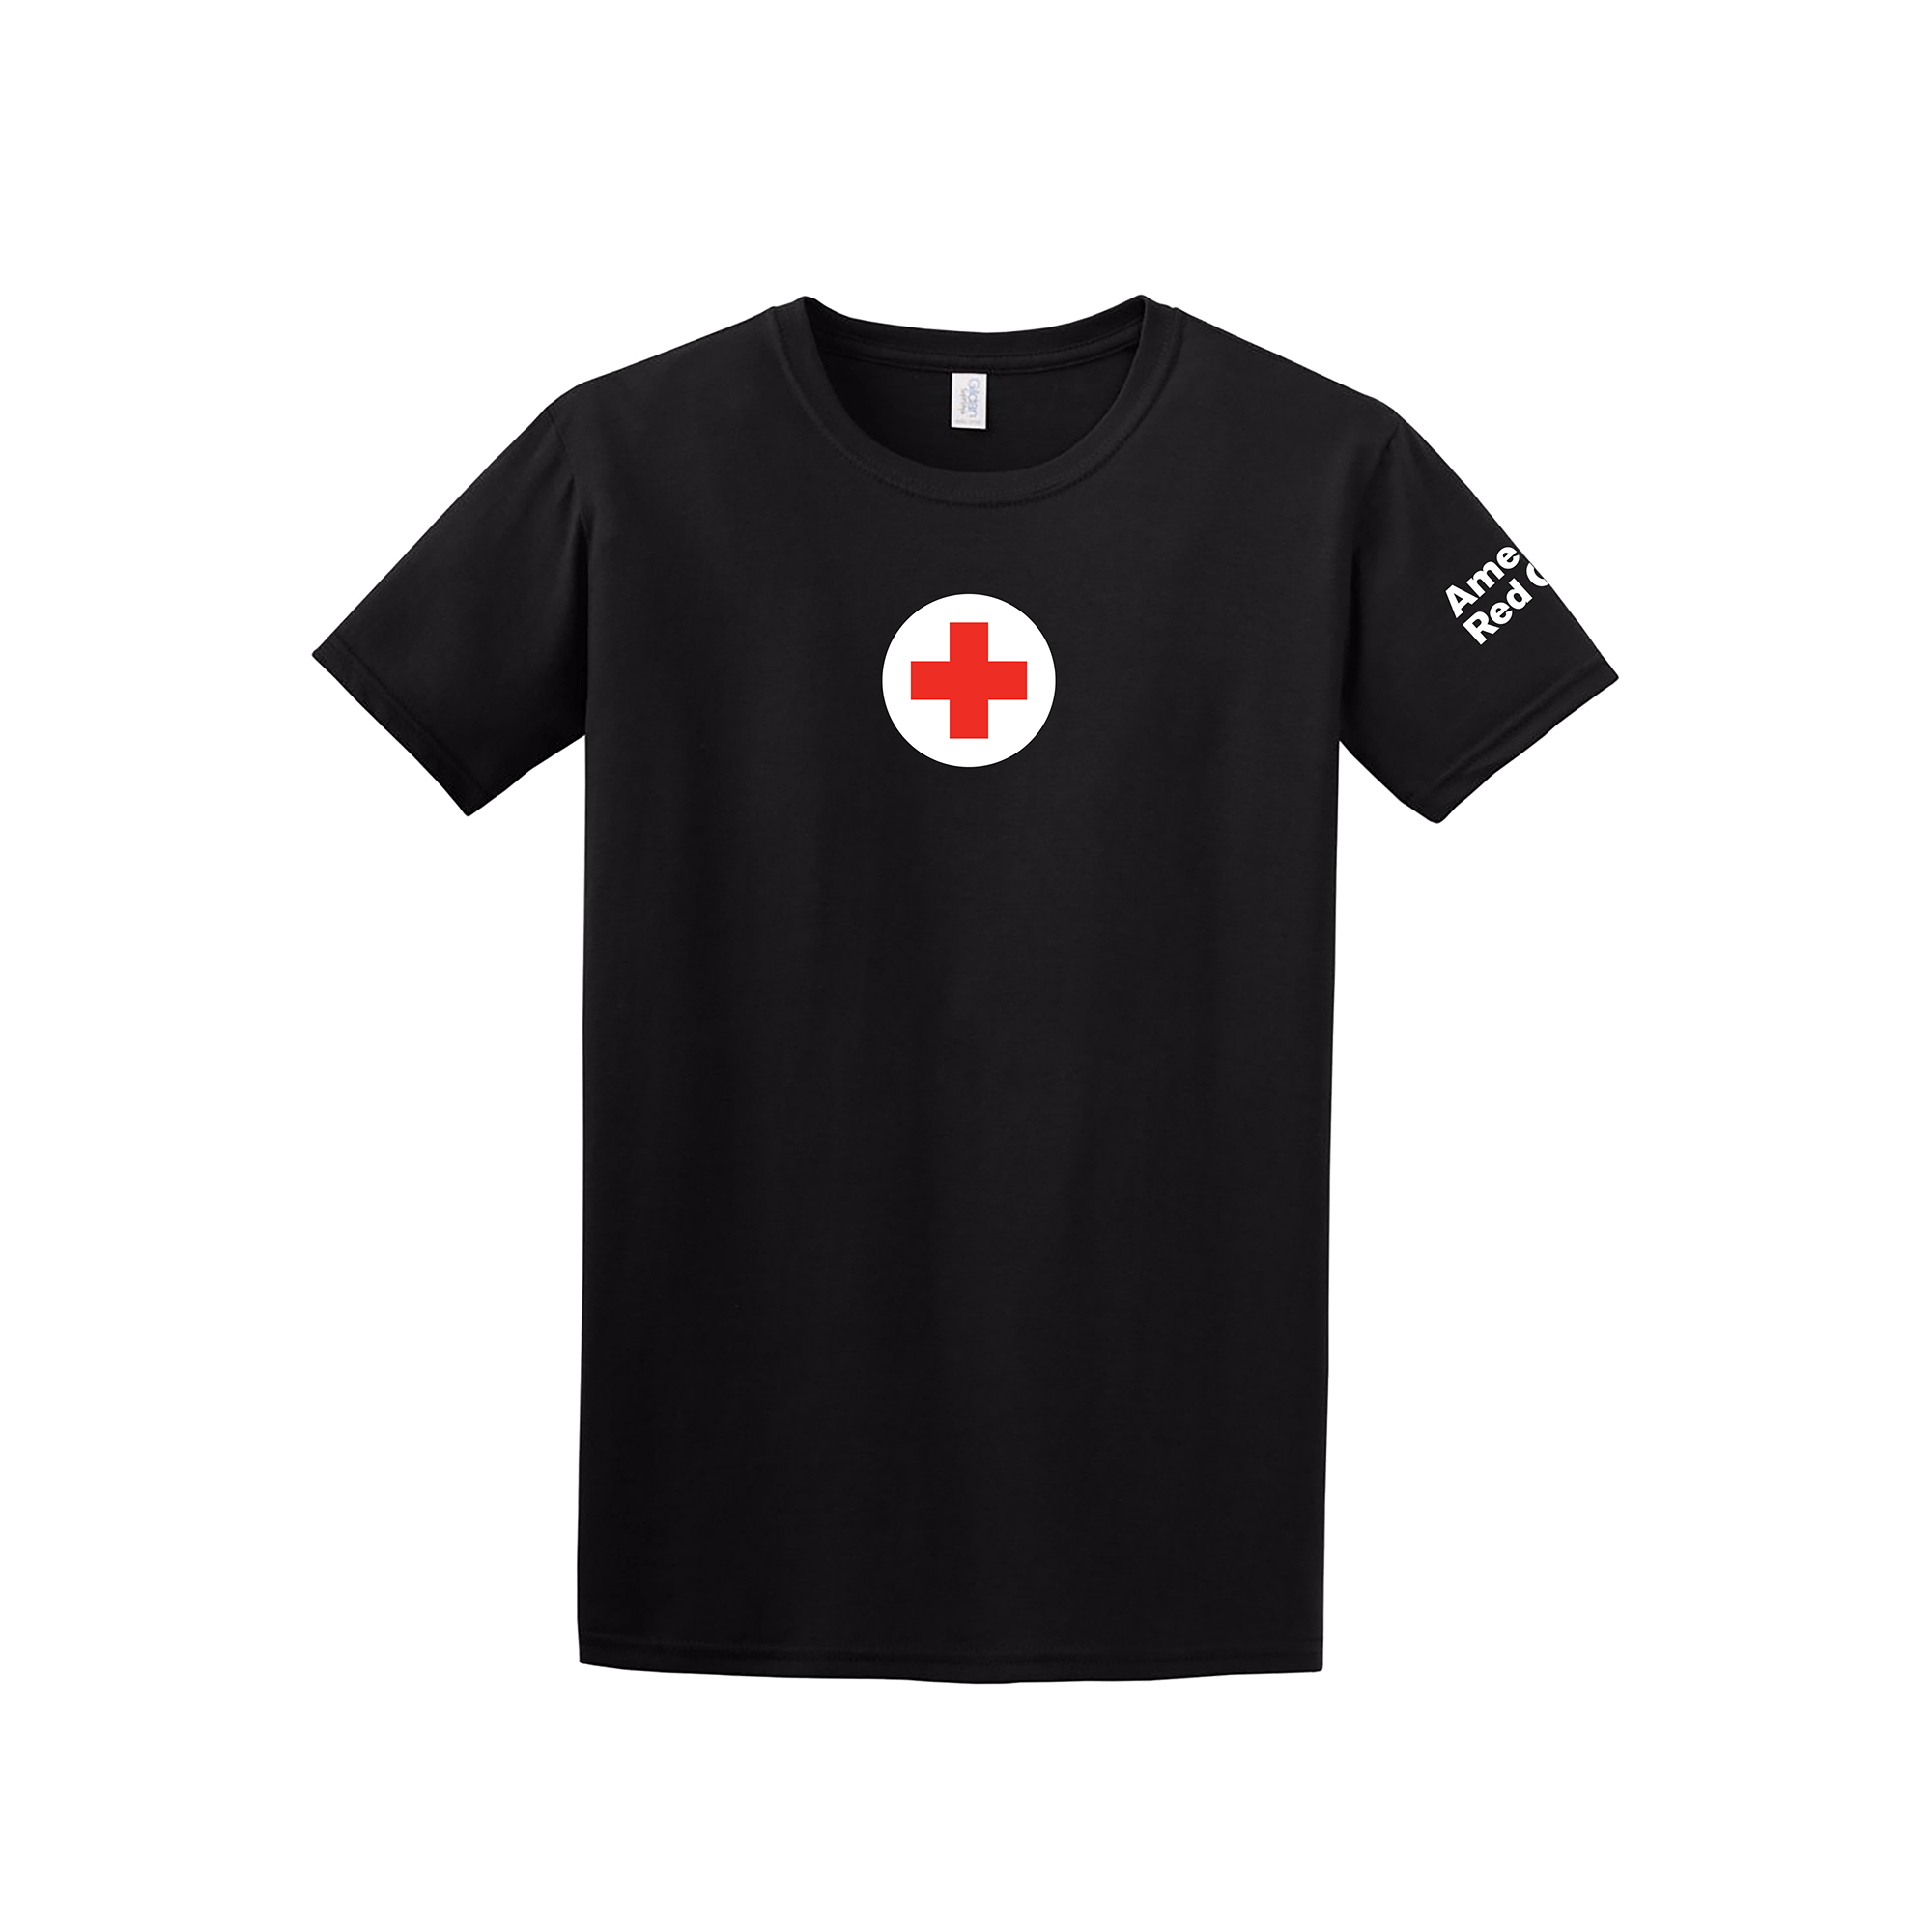 Classic American Red Cross Logo - Unisex 100% Cotton T-Shirt with ARC Logo | Red Cross Store